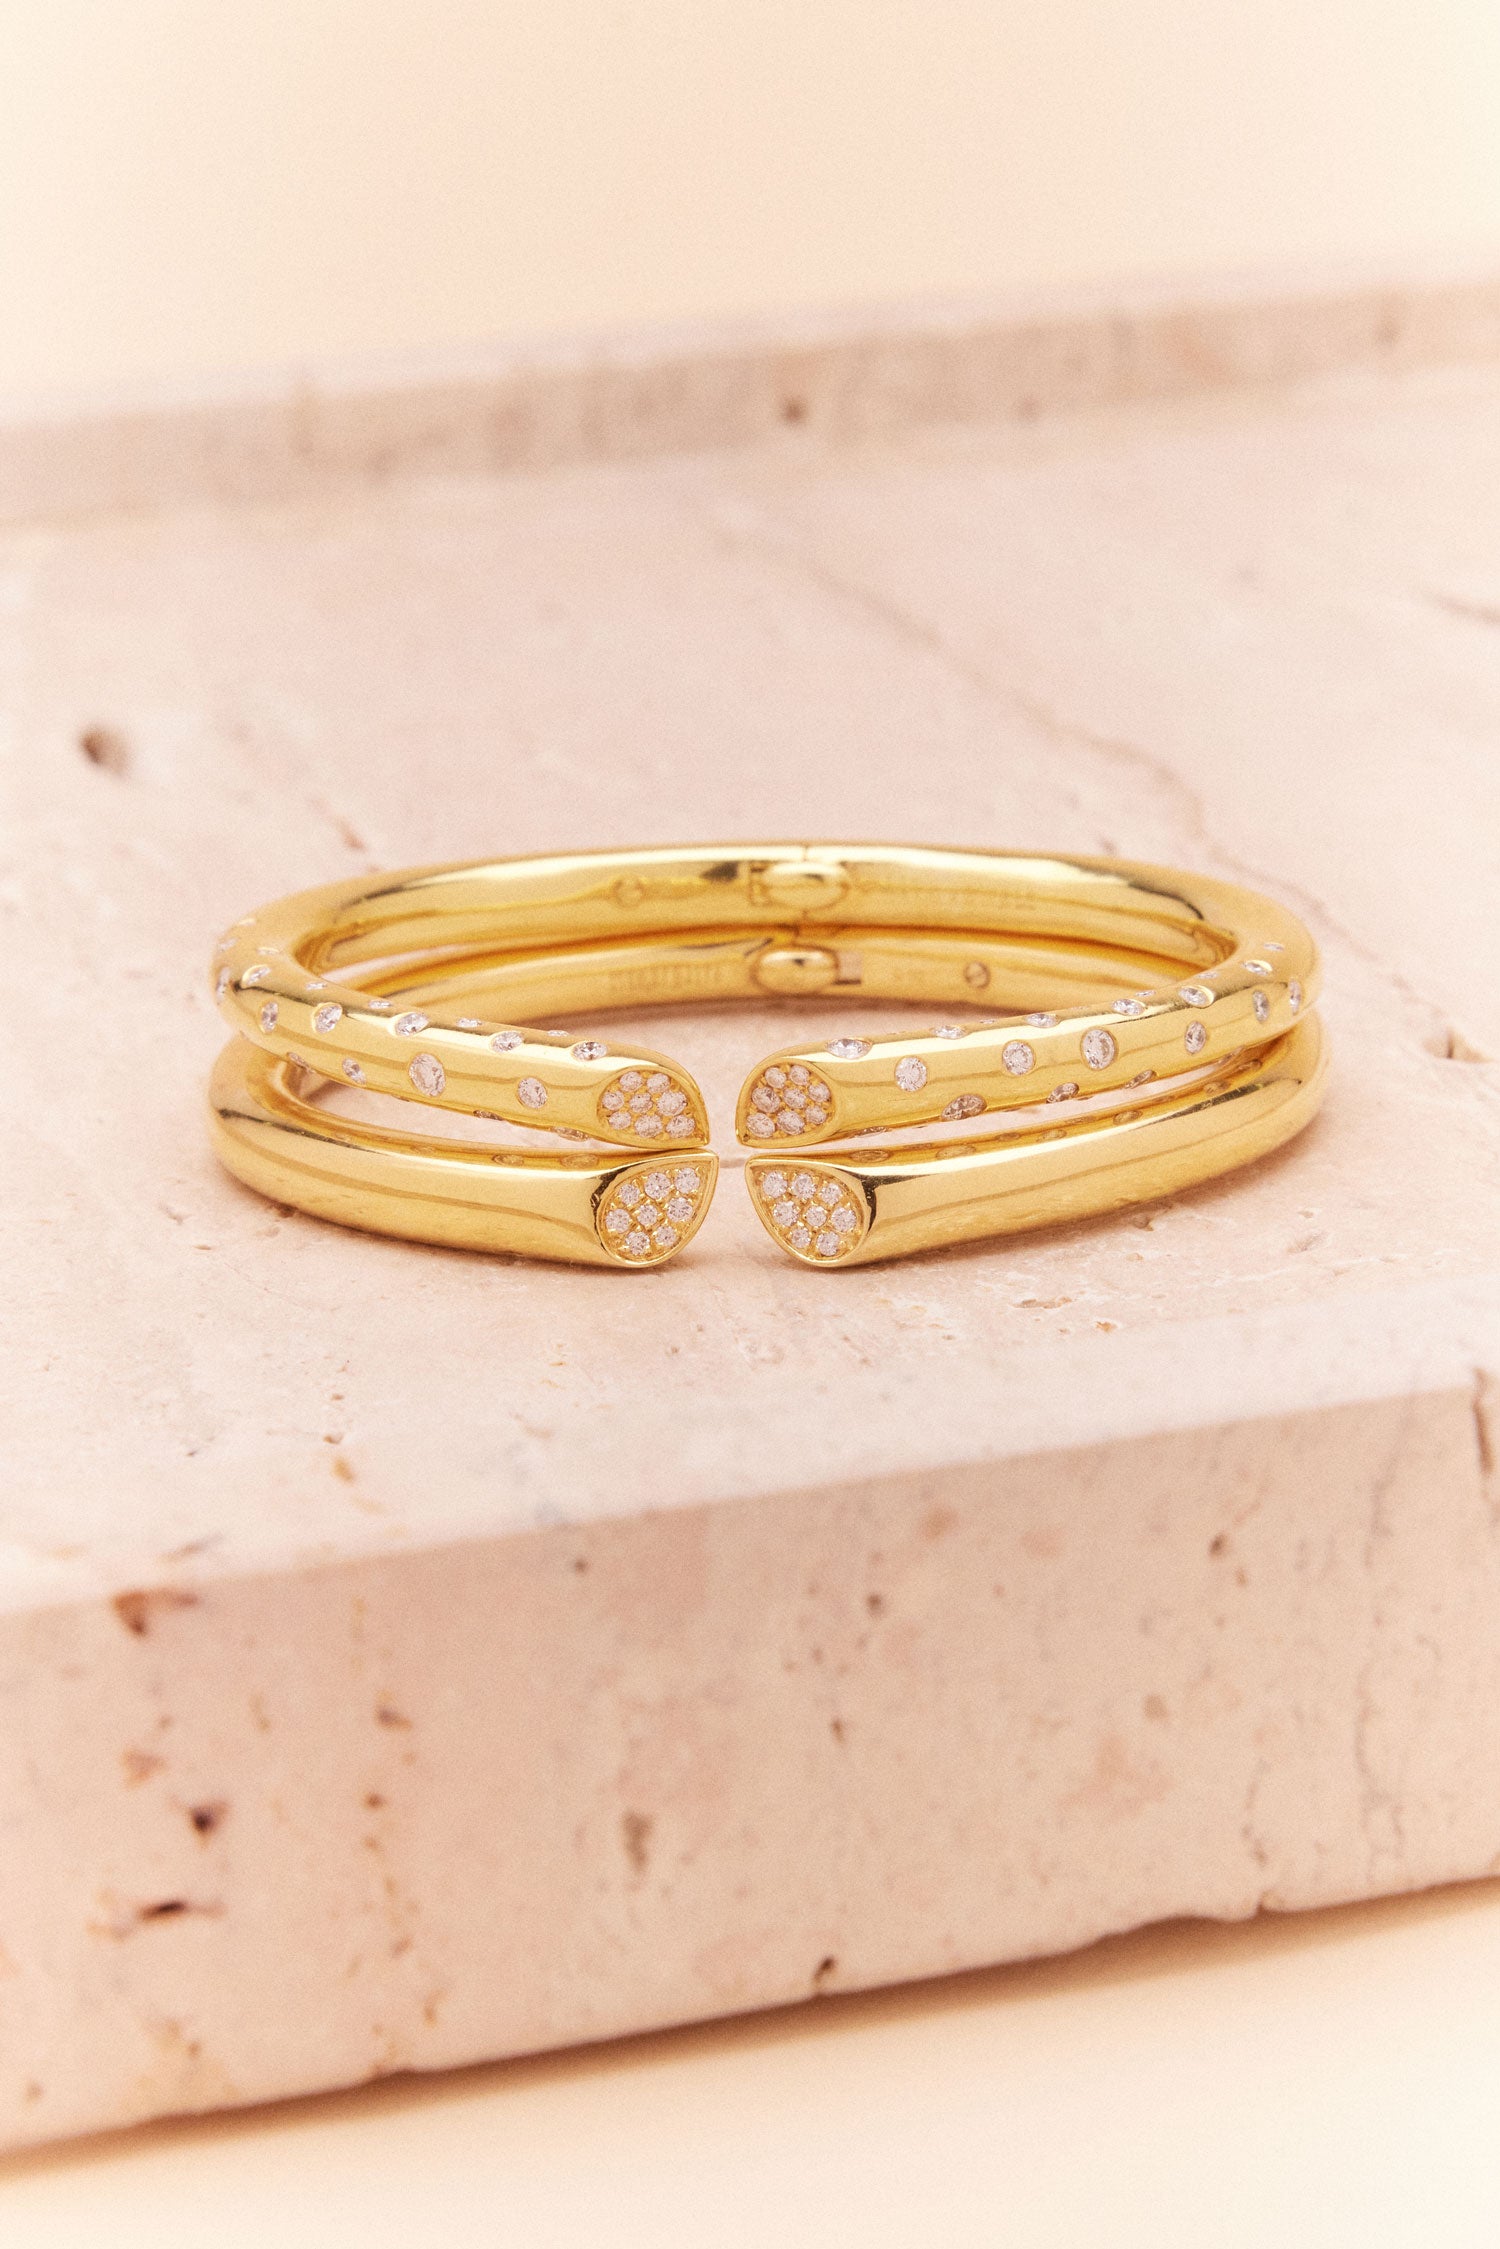 Whispers of Love Spotted Diamond Bangle - Yellow Gold